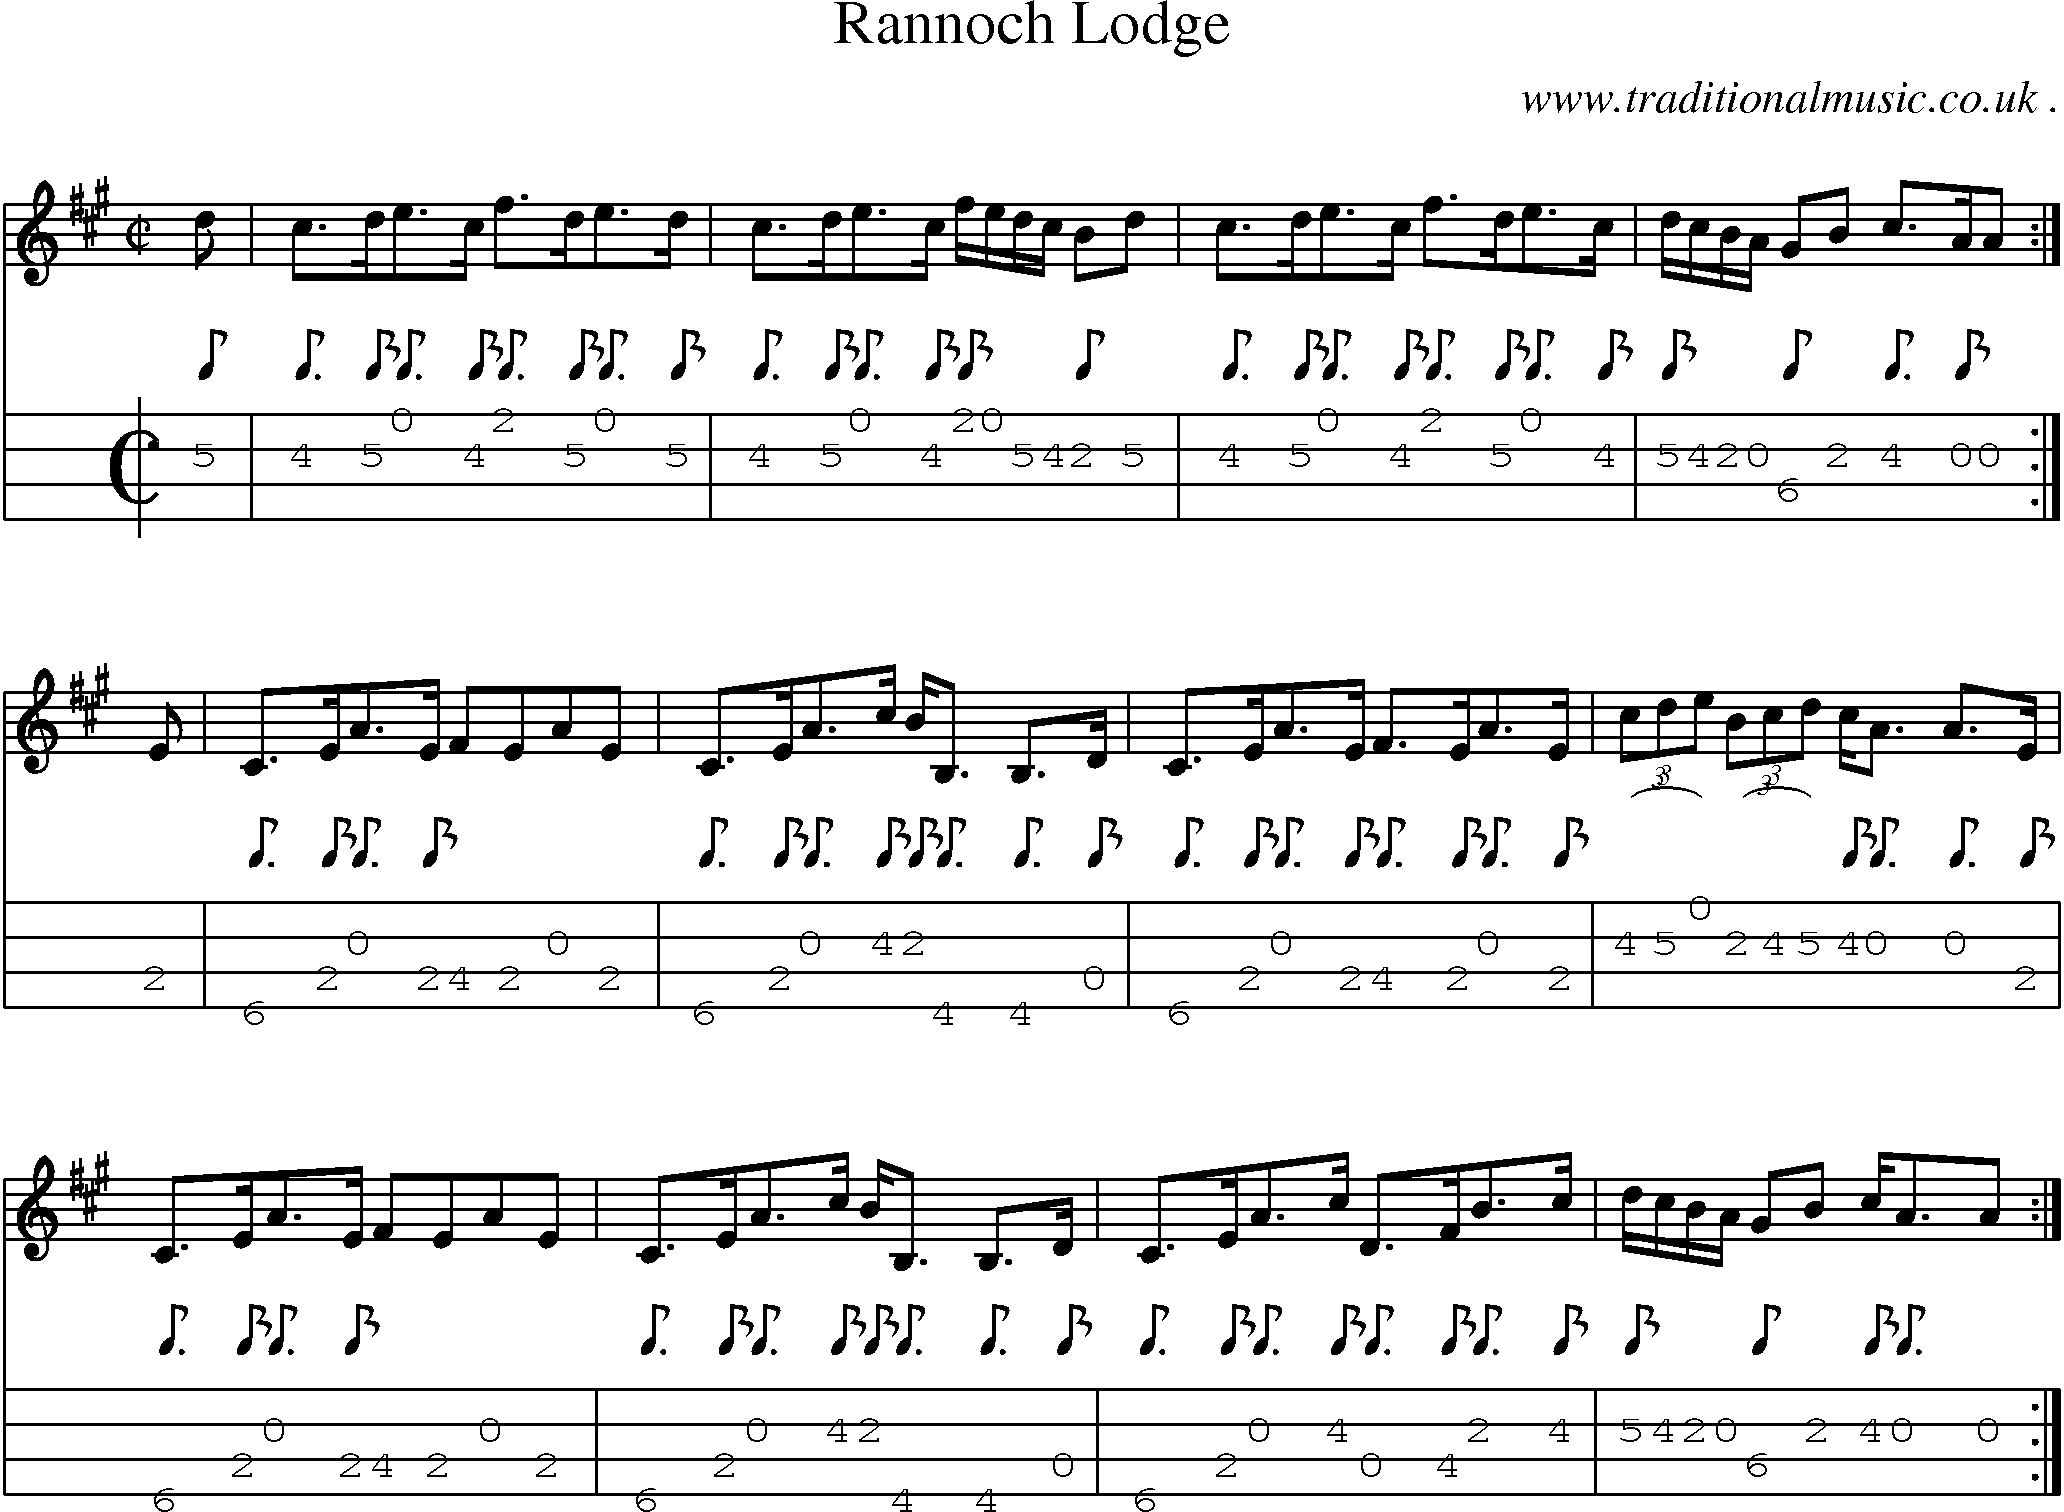 Sheet-music  score, Chords and Mandolin Tabs for Rannoch Lodge